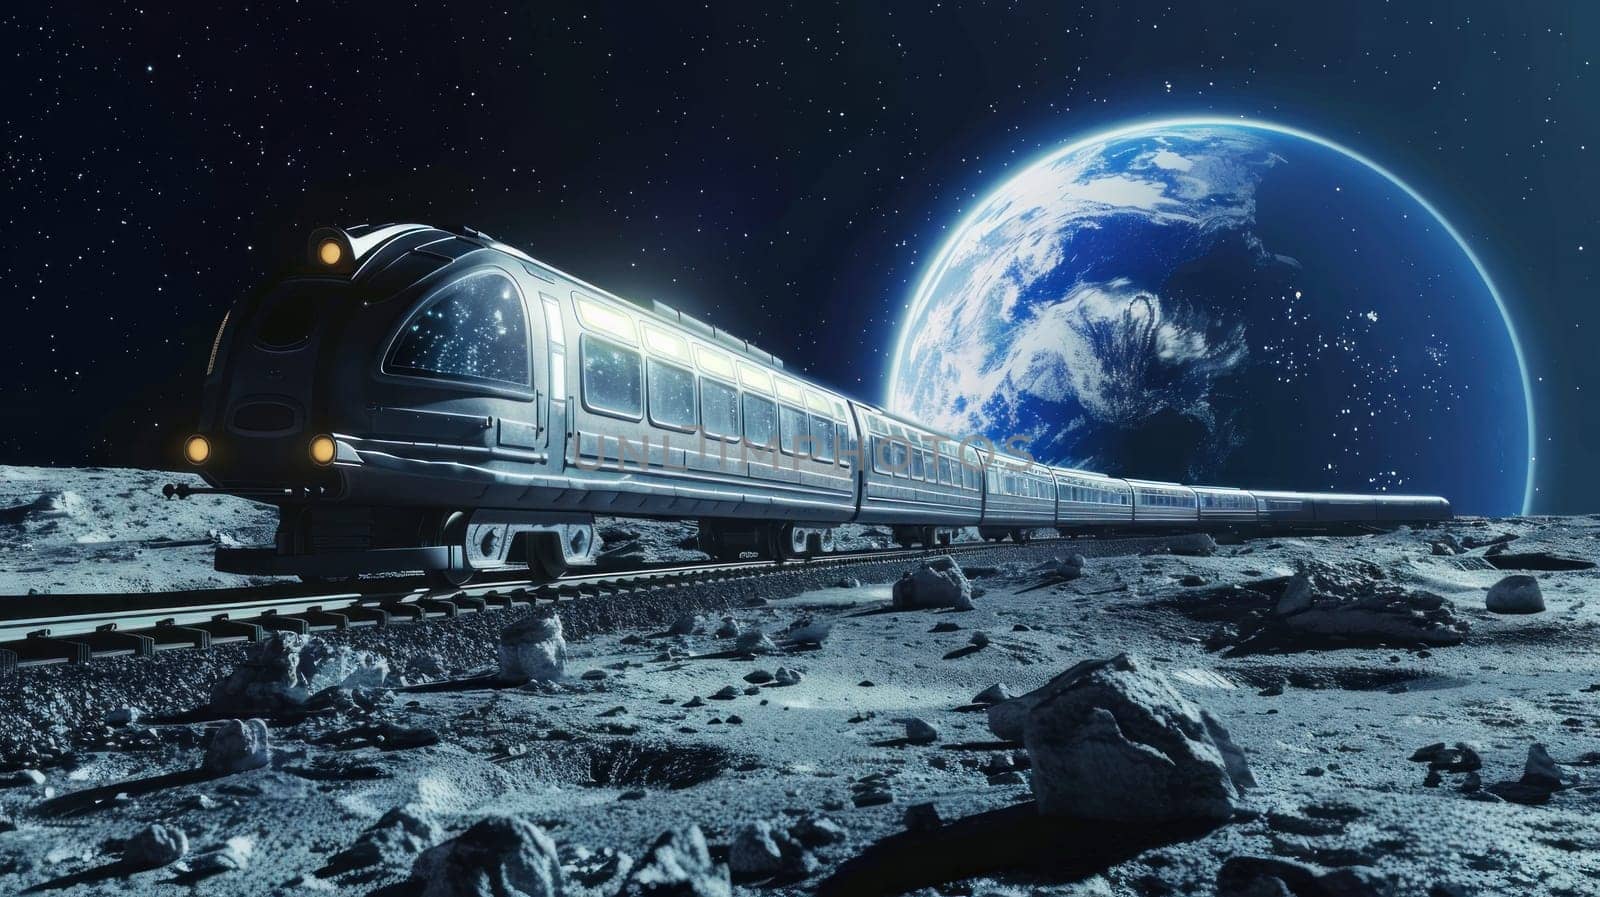 A train is traveling through space next to a planet. The train is silver and has windows. The planet is blue and has a rocky surface. The scene is peaceful and serene